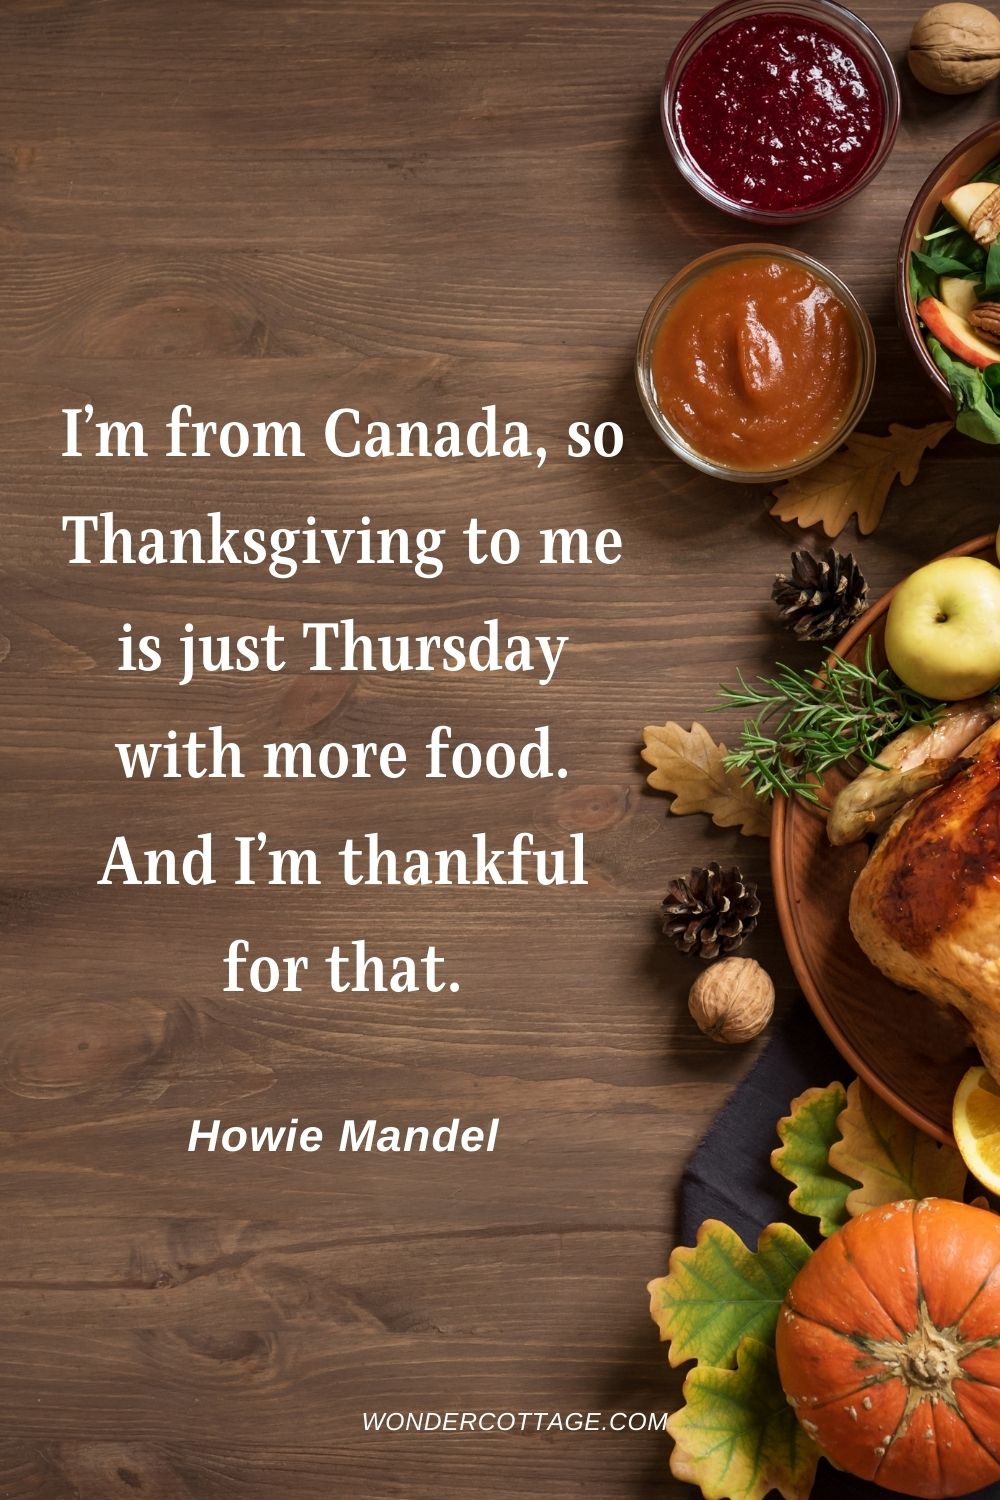 I’m from Canada, so Thanksgiving to me is just Thursday with more food. And I’m thankful for that. Howie Mandel